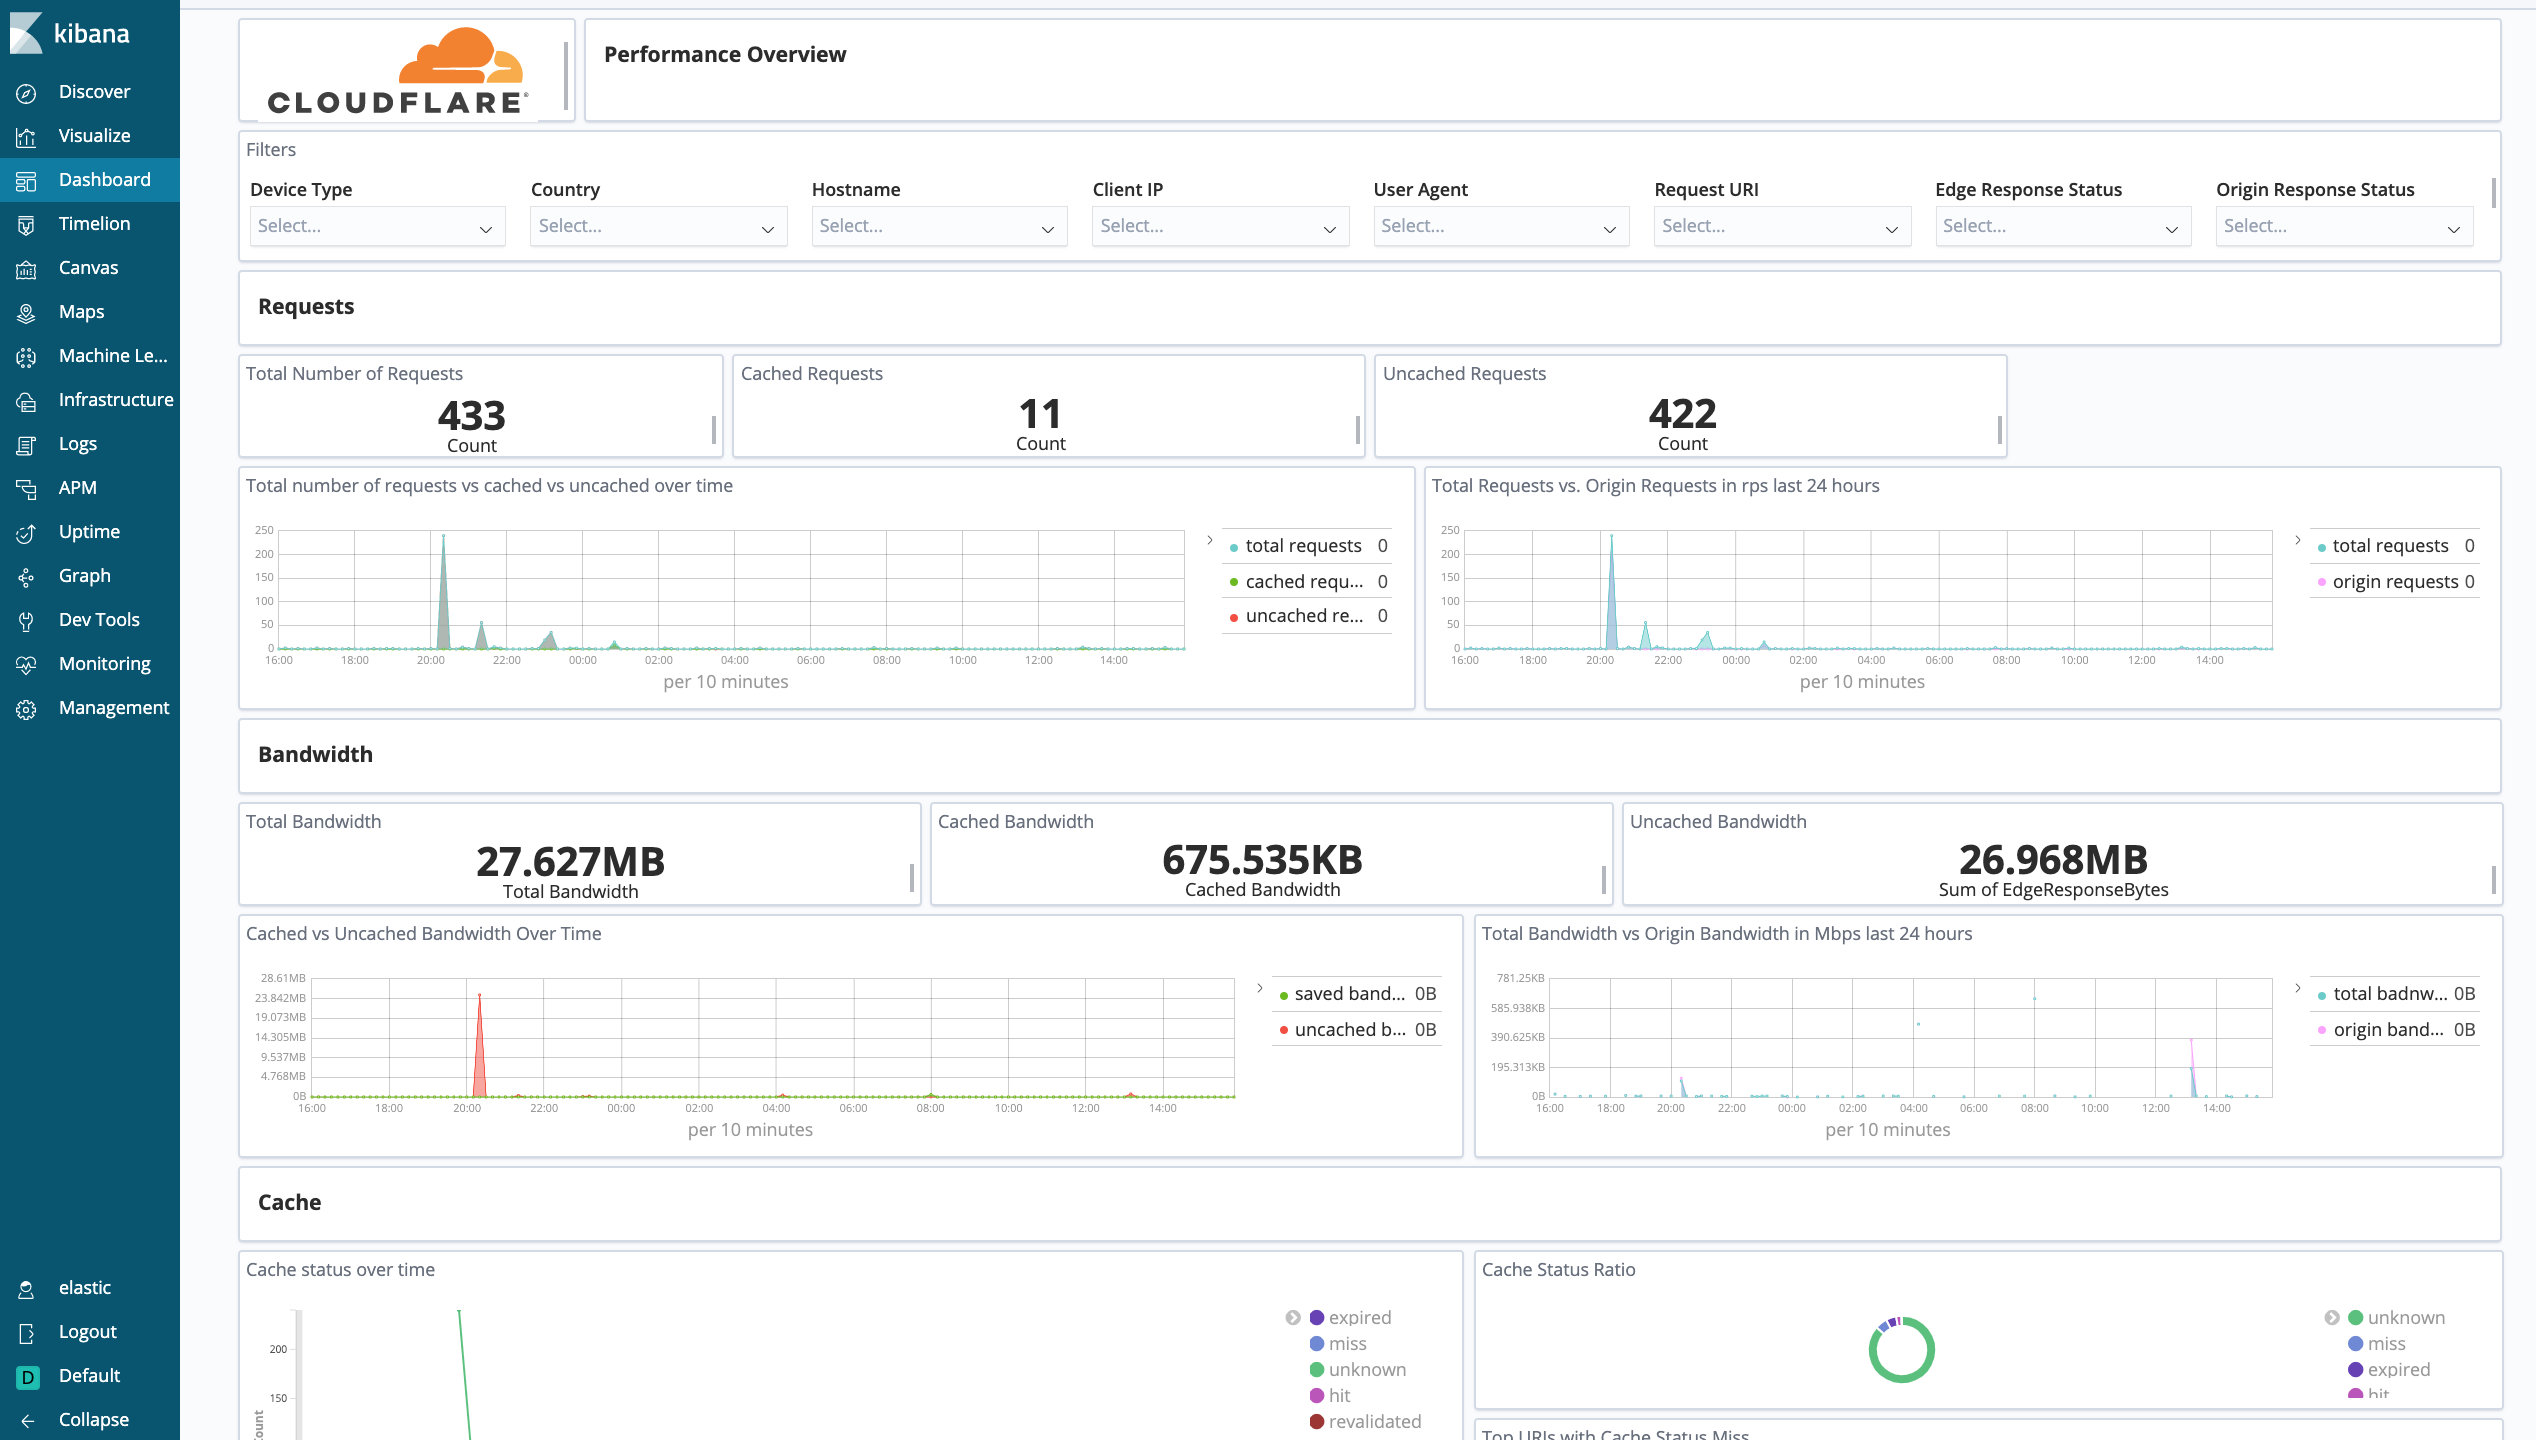 Cloudflare dashboard showing Performance Overiew (requests, bandwidth, cache)